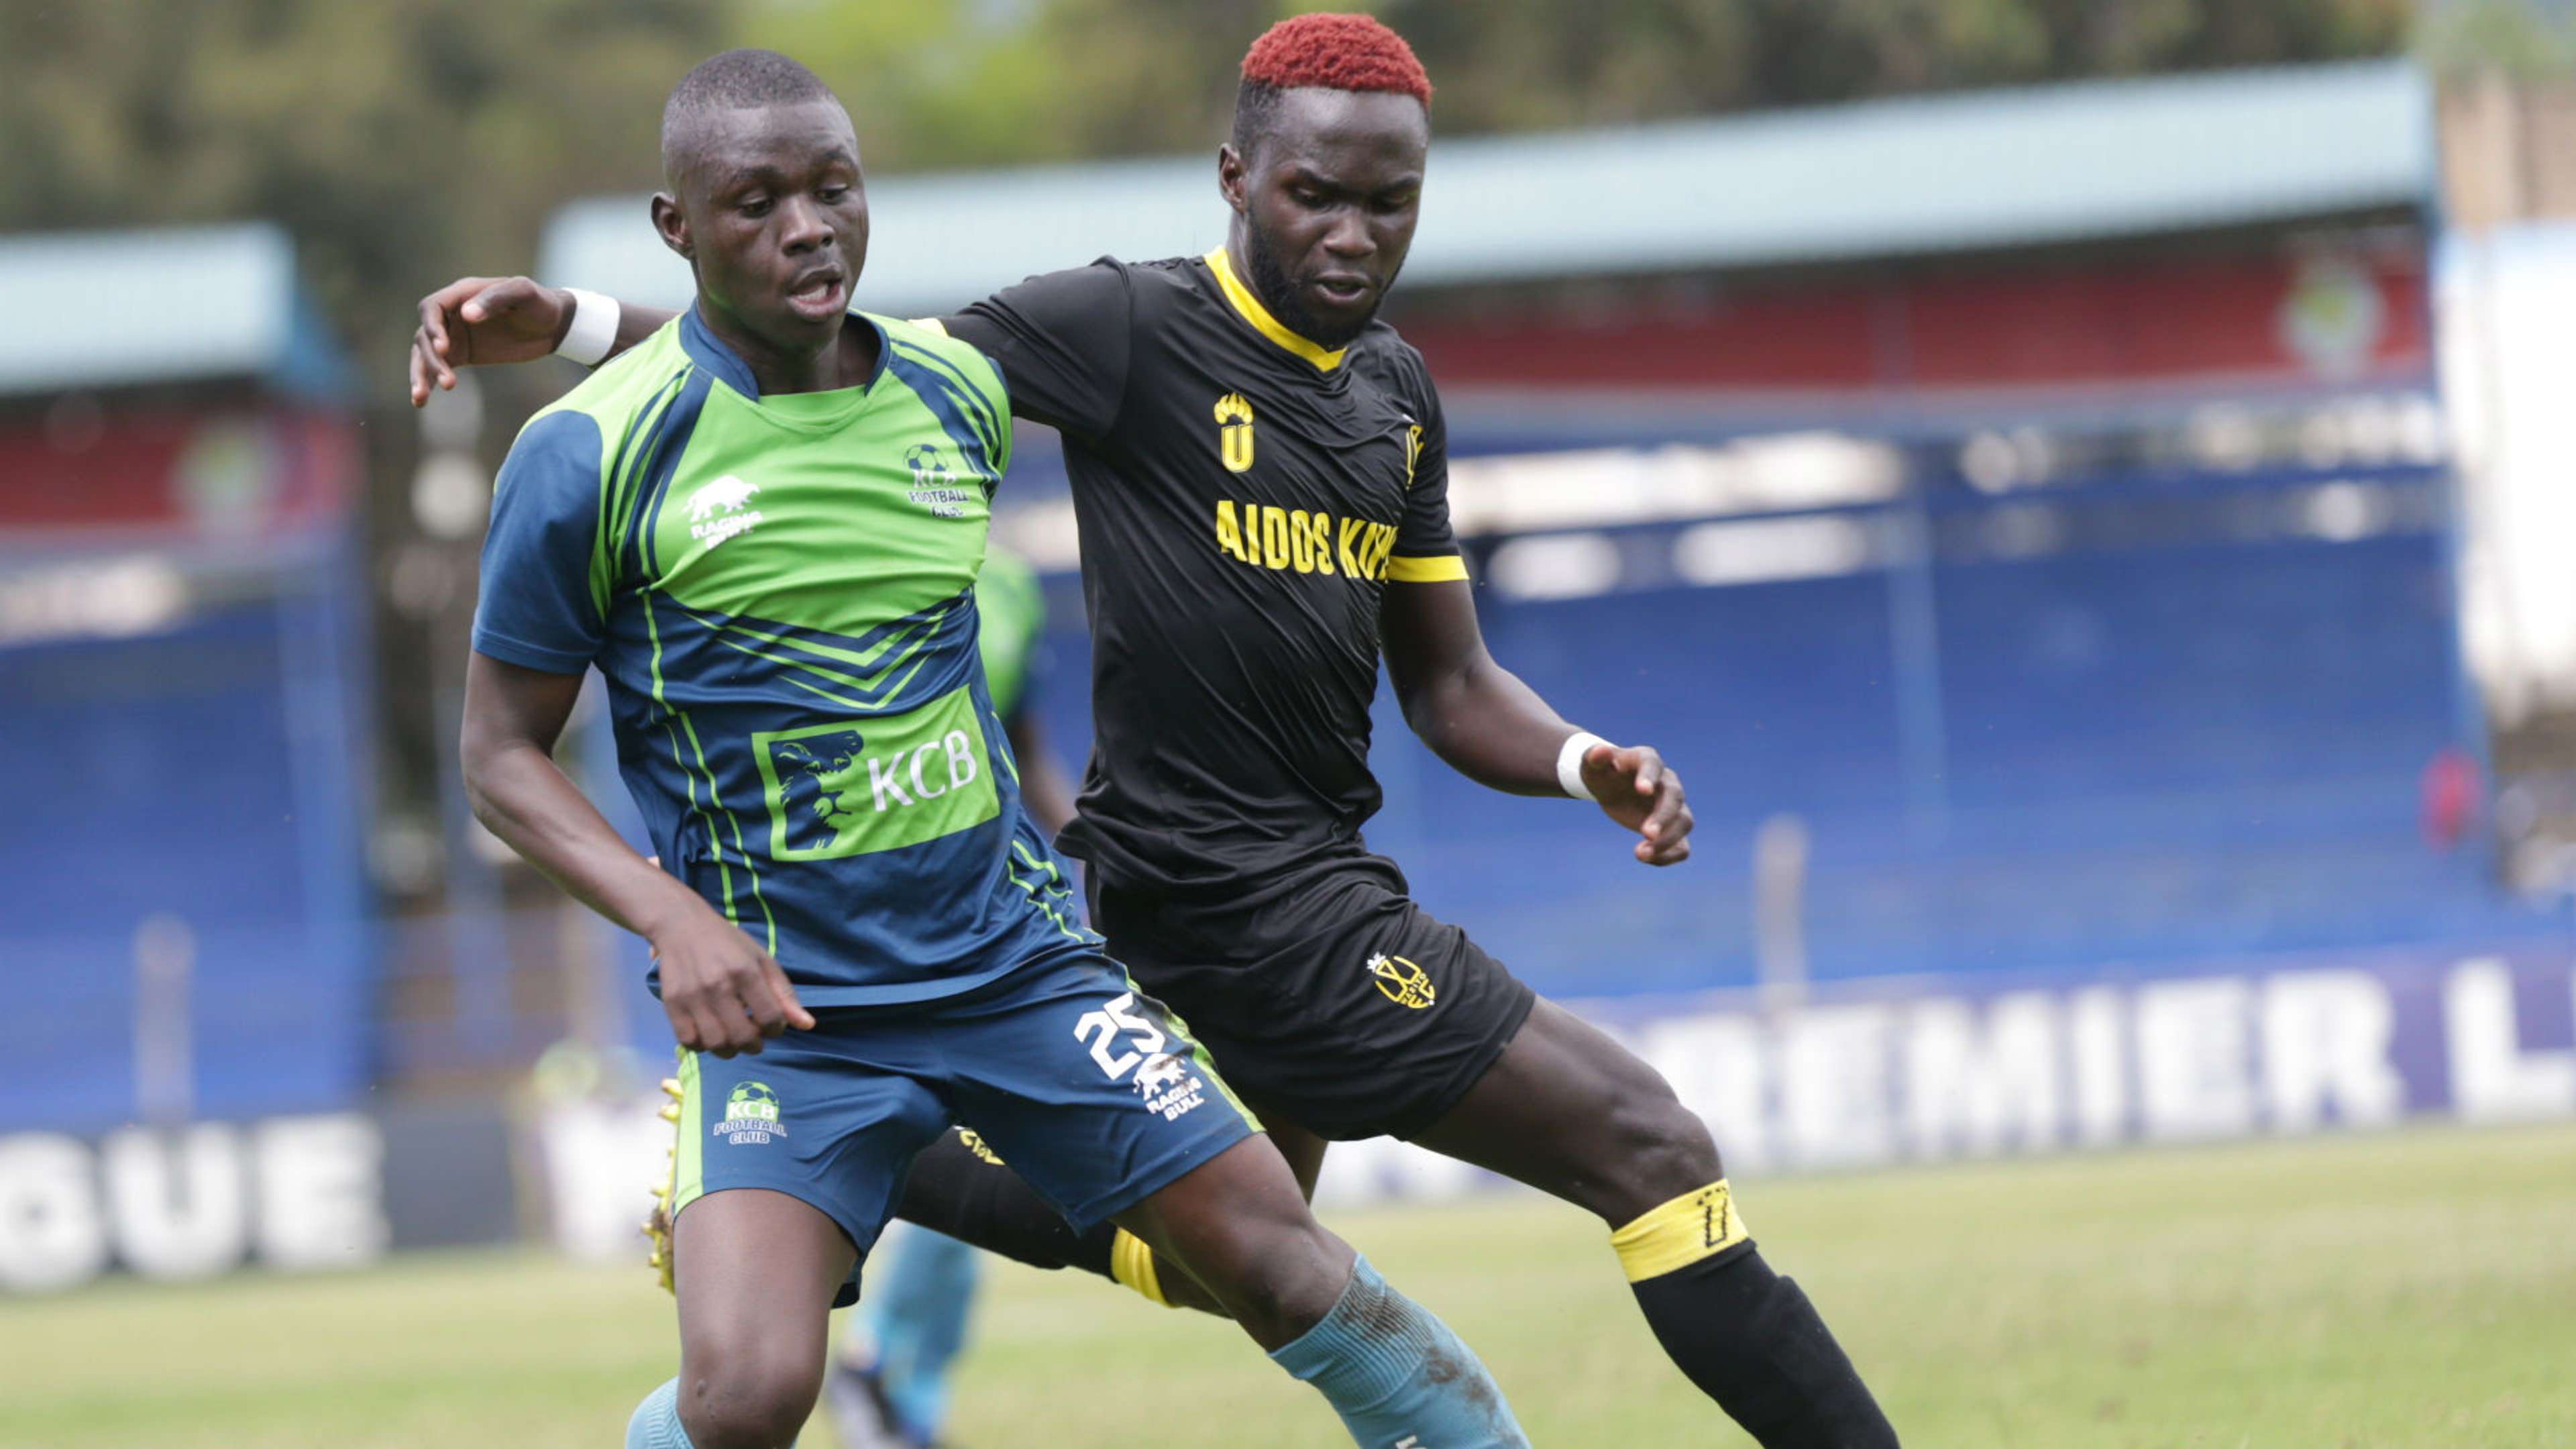 KENNEDDY OWINO OF KCB FCvs VICTOR NDINYA OF WAZITO FC.